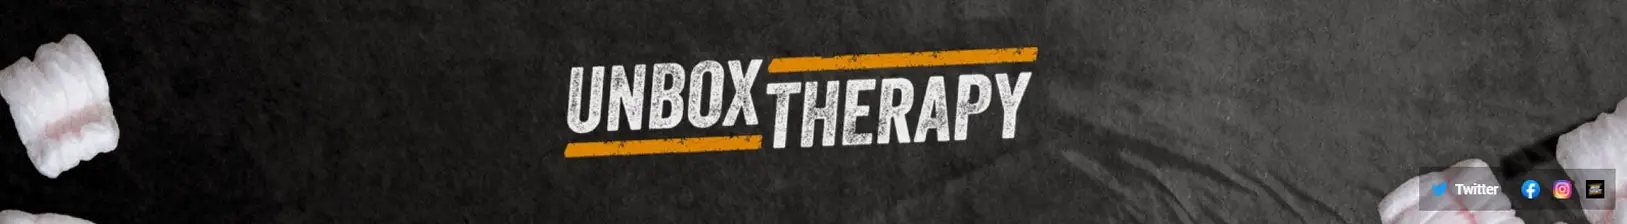 Unbox Therapy youtube channel banner